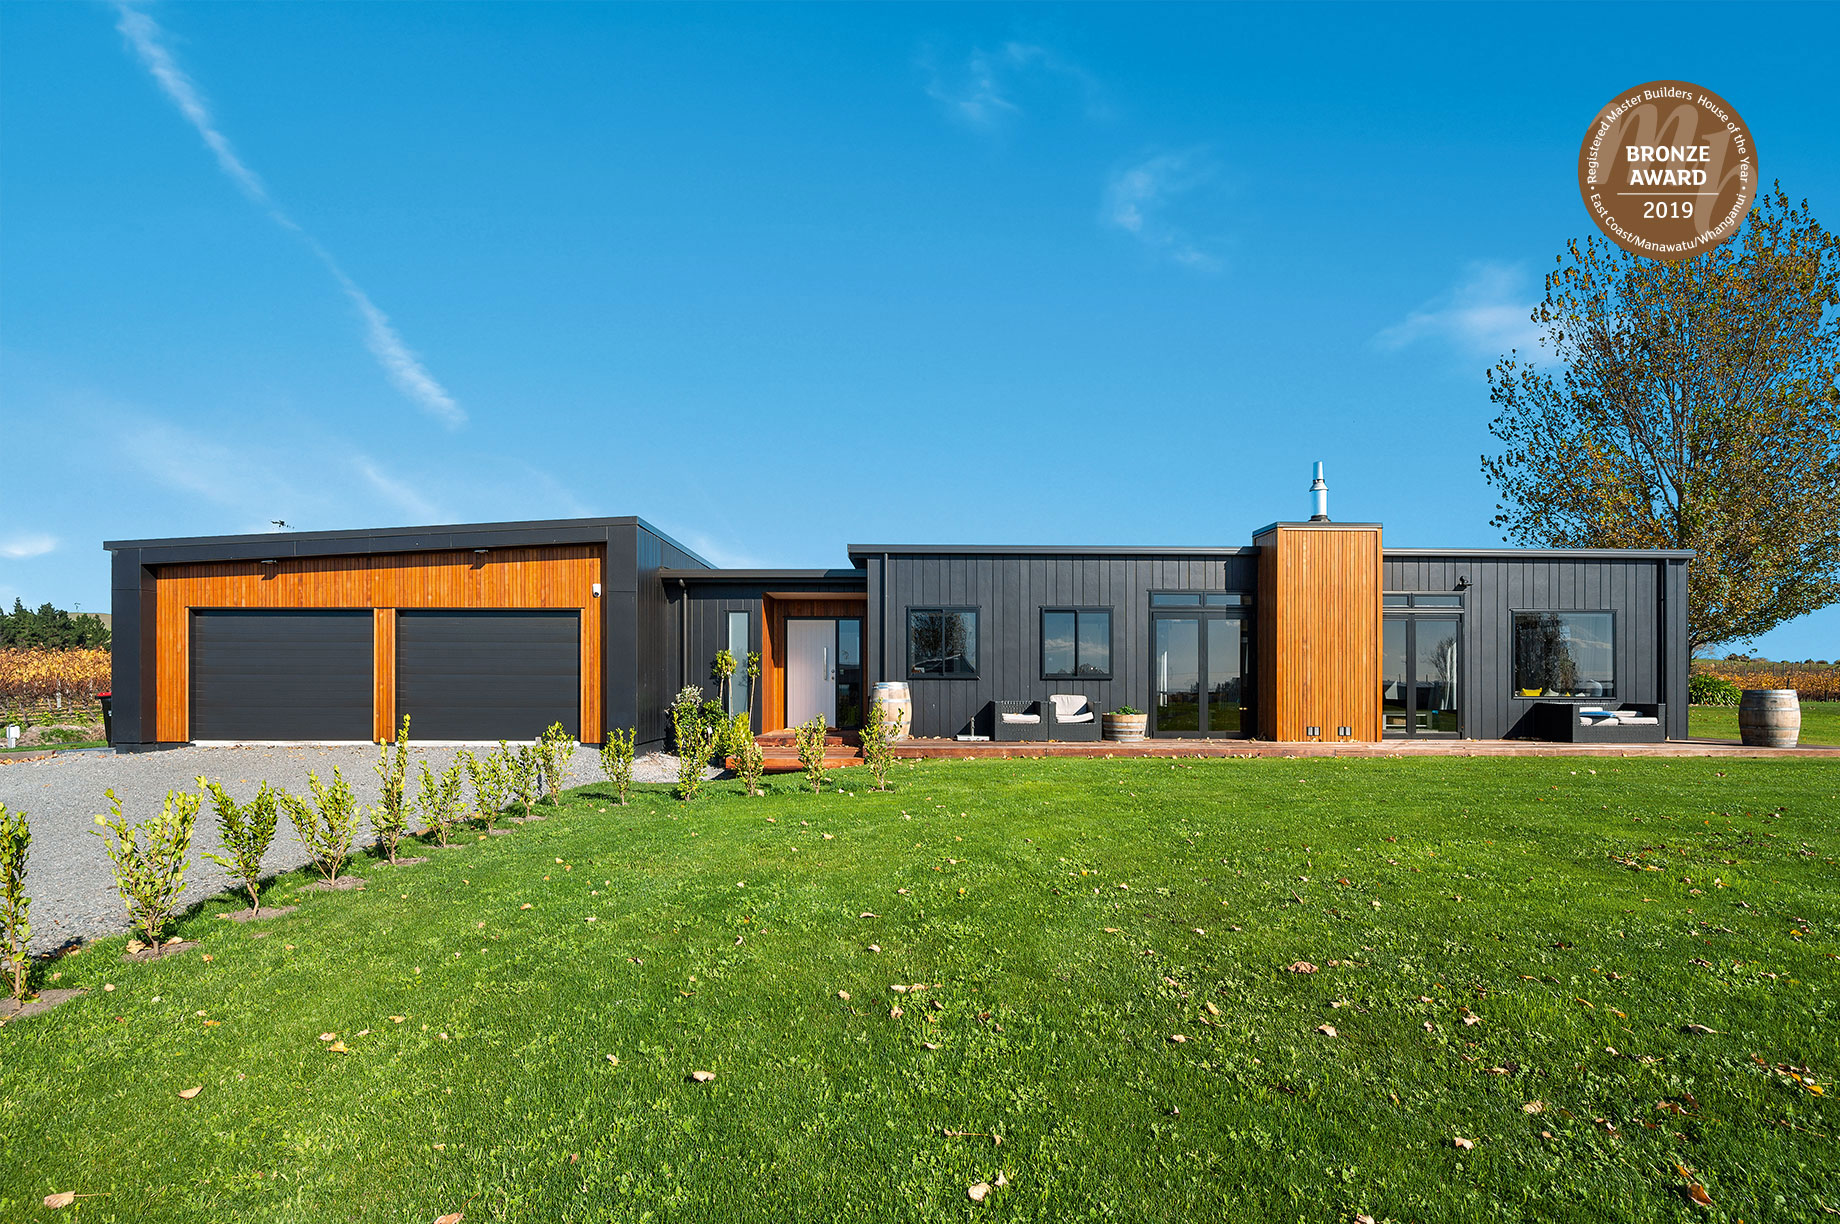 Award winning black and wooden rural home in Hawkes Bay